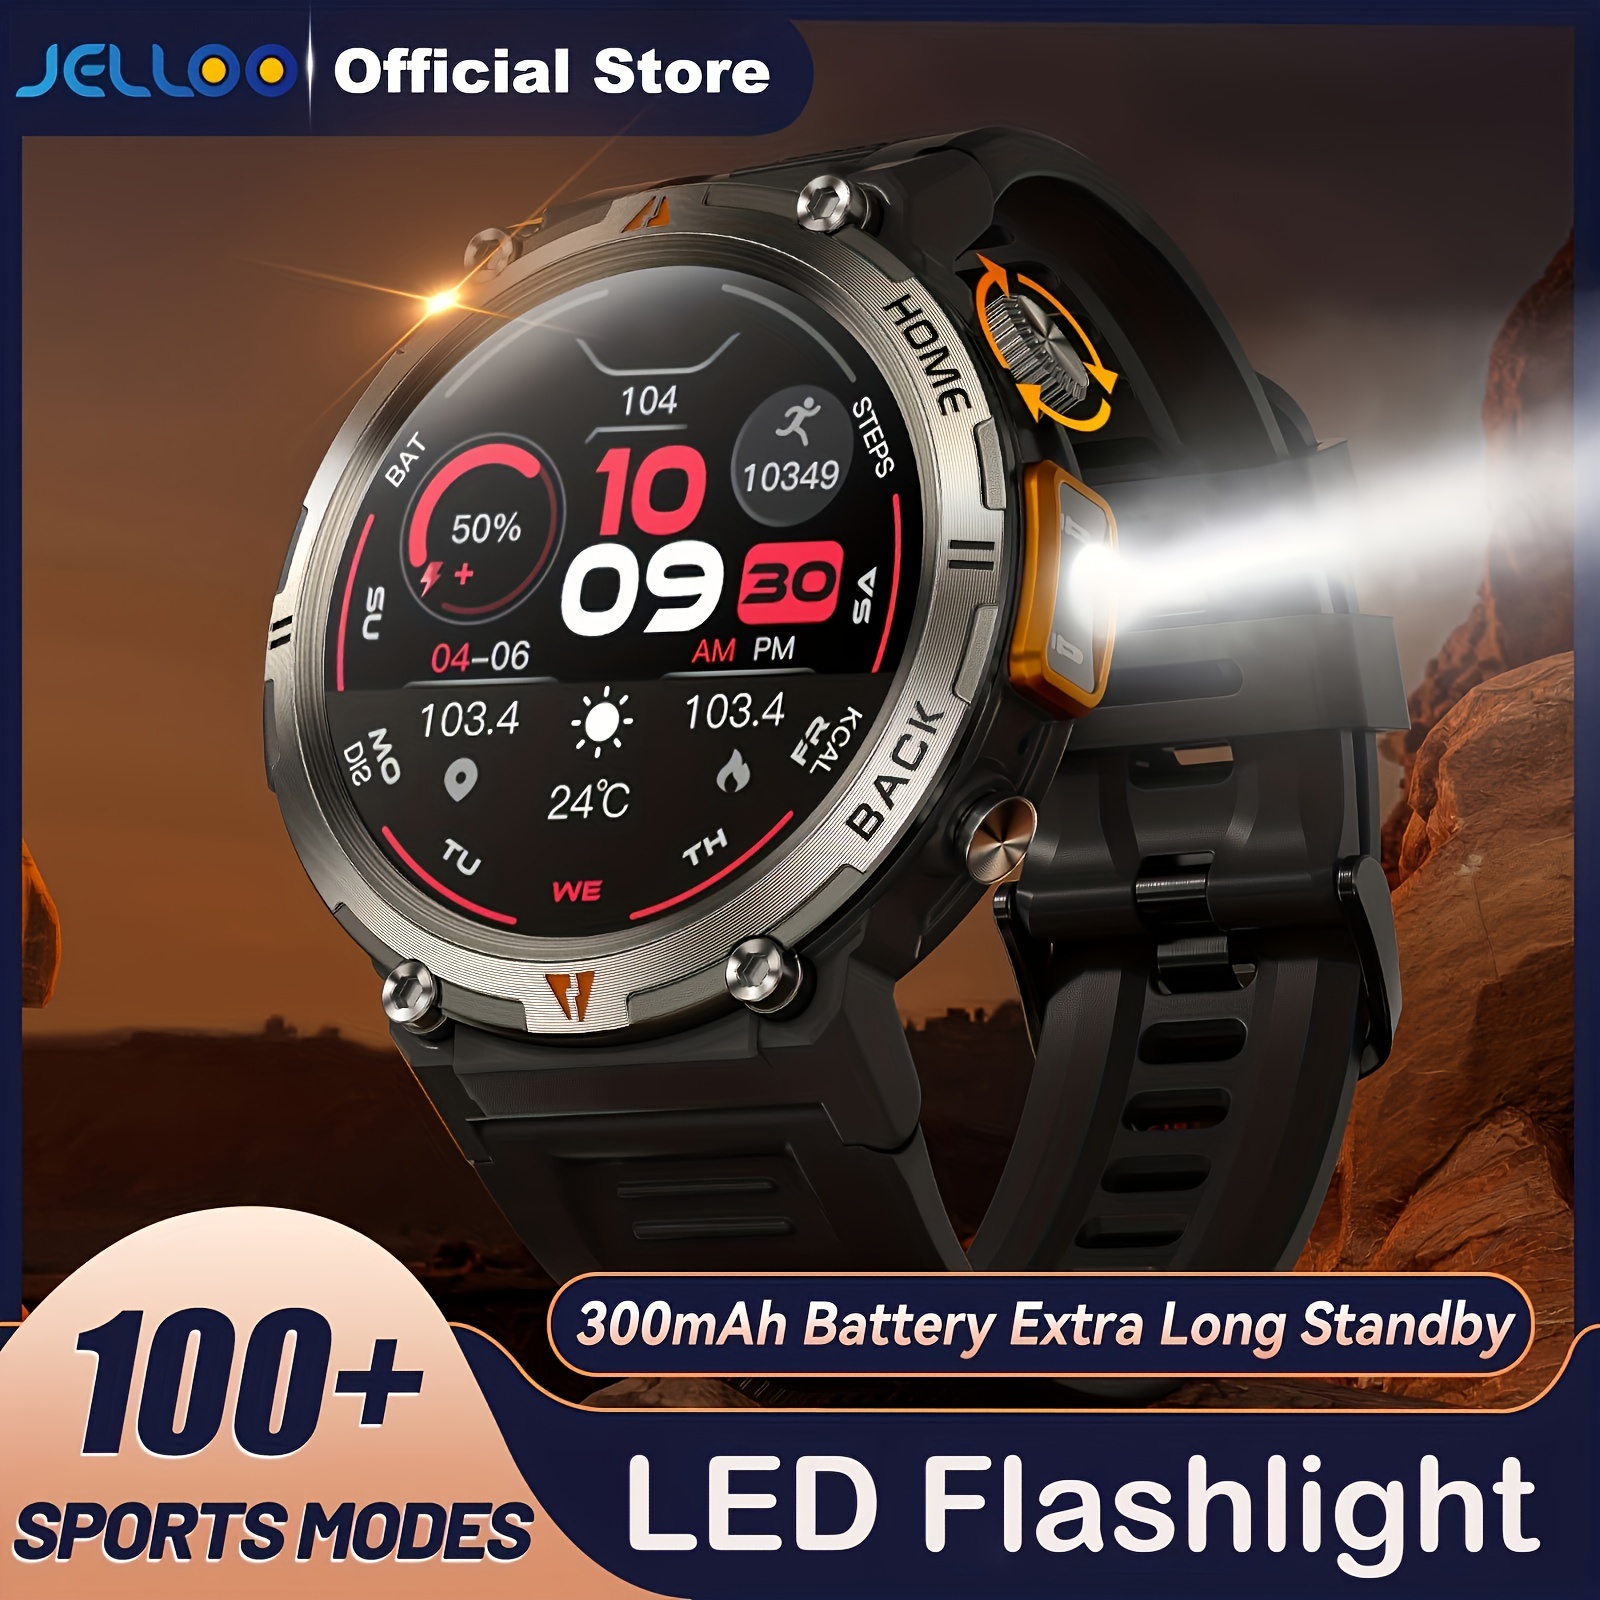 

Jelloo Sports Smart Watch For Men: Led Lighting, Answer/make Calls, Outdoor Sports Watch, Fitness , Pedometer & More - Compatible With Android!